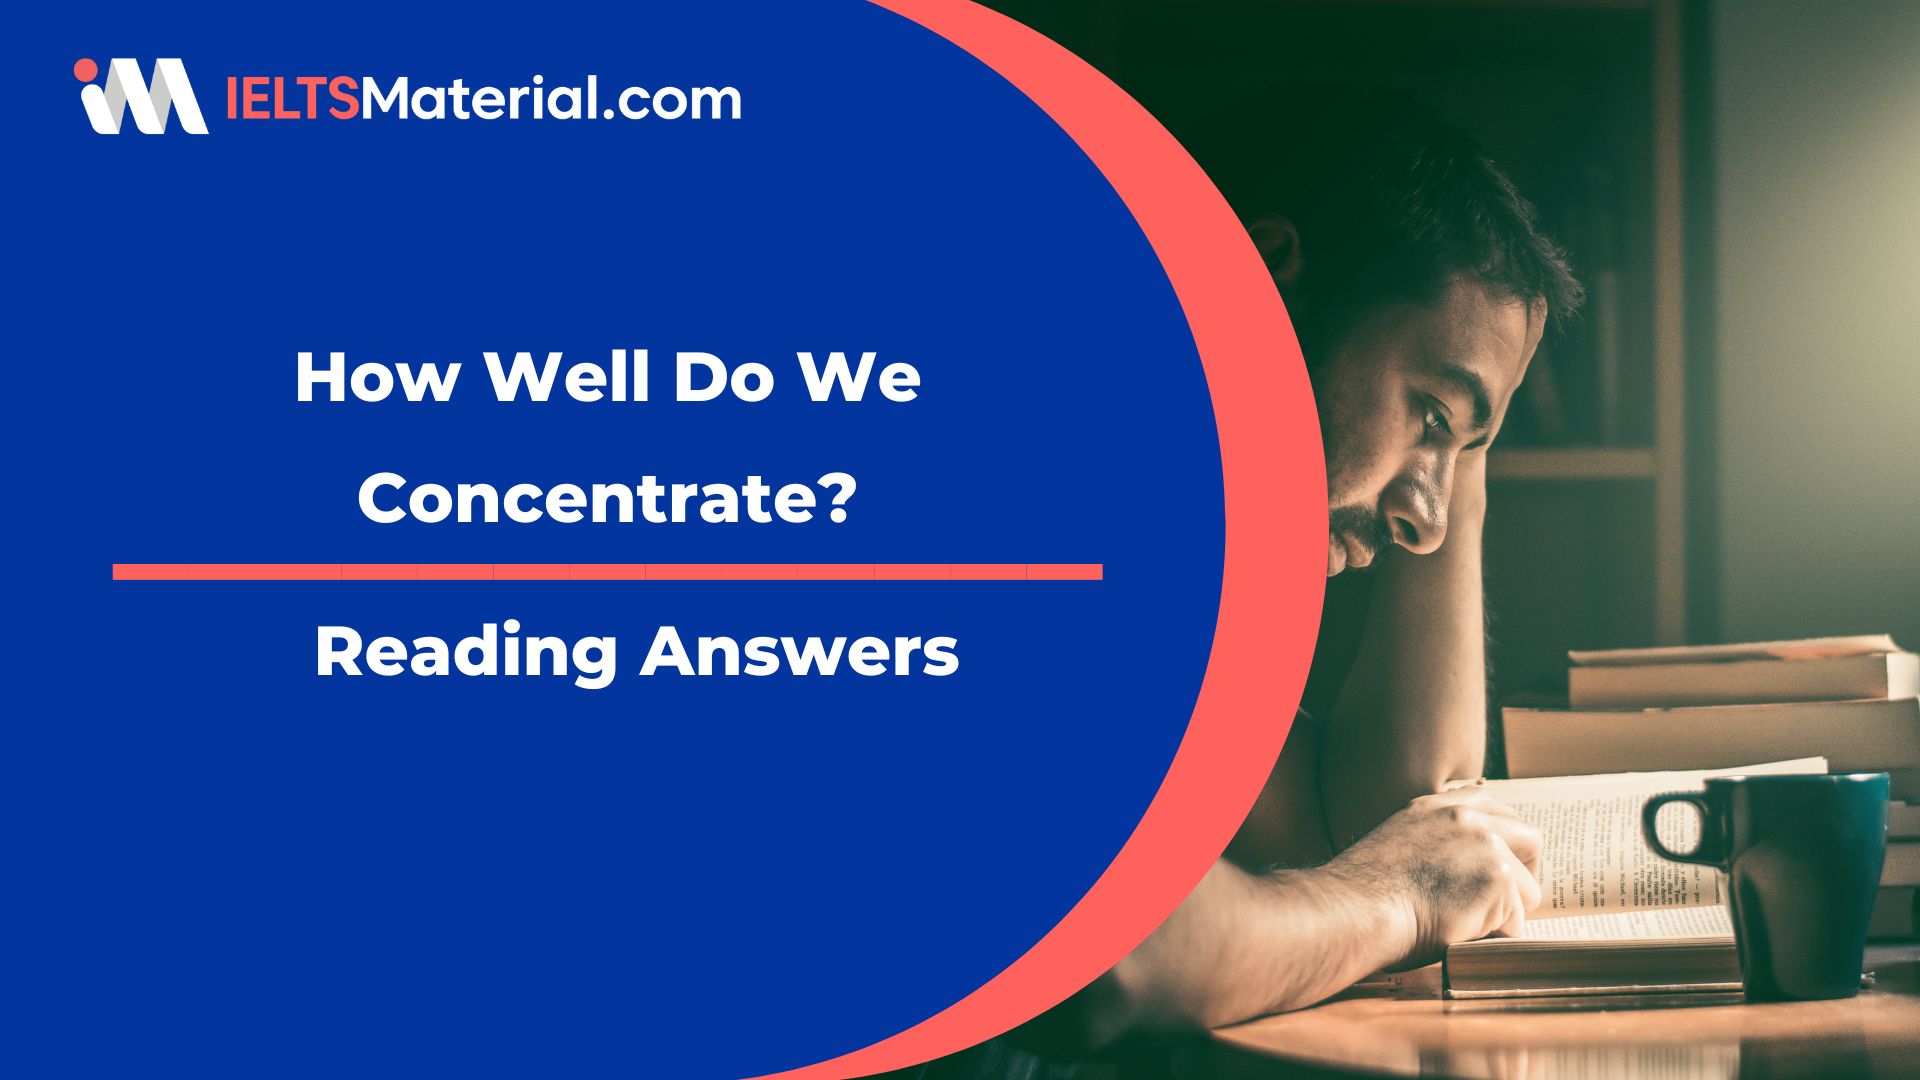 How Well Do We Concentrate? Reading Answers